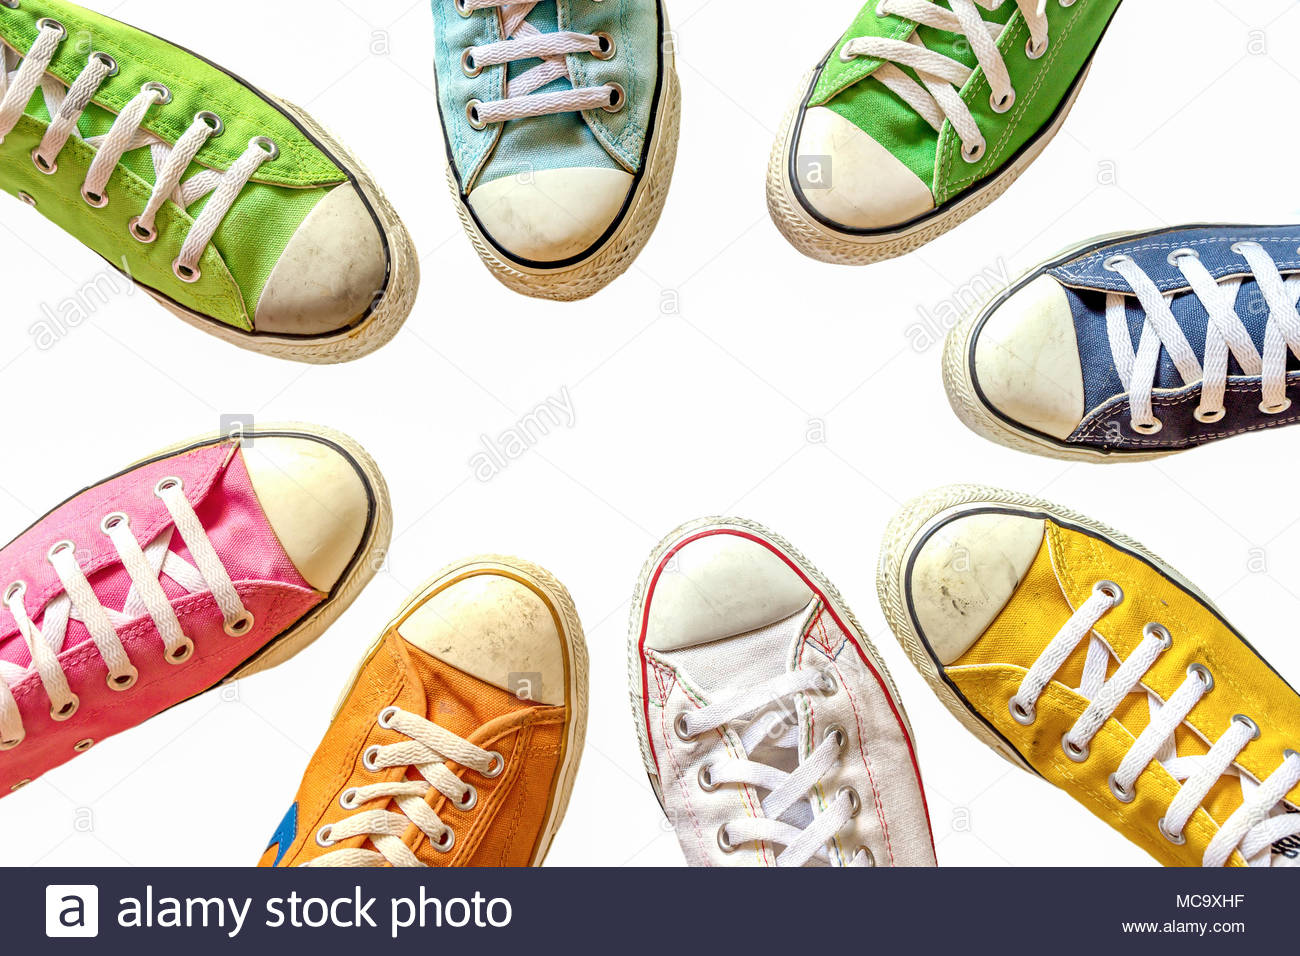 Variety Of The Colorful Leather Shoes On A White Background